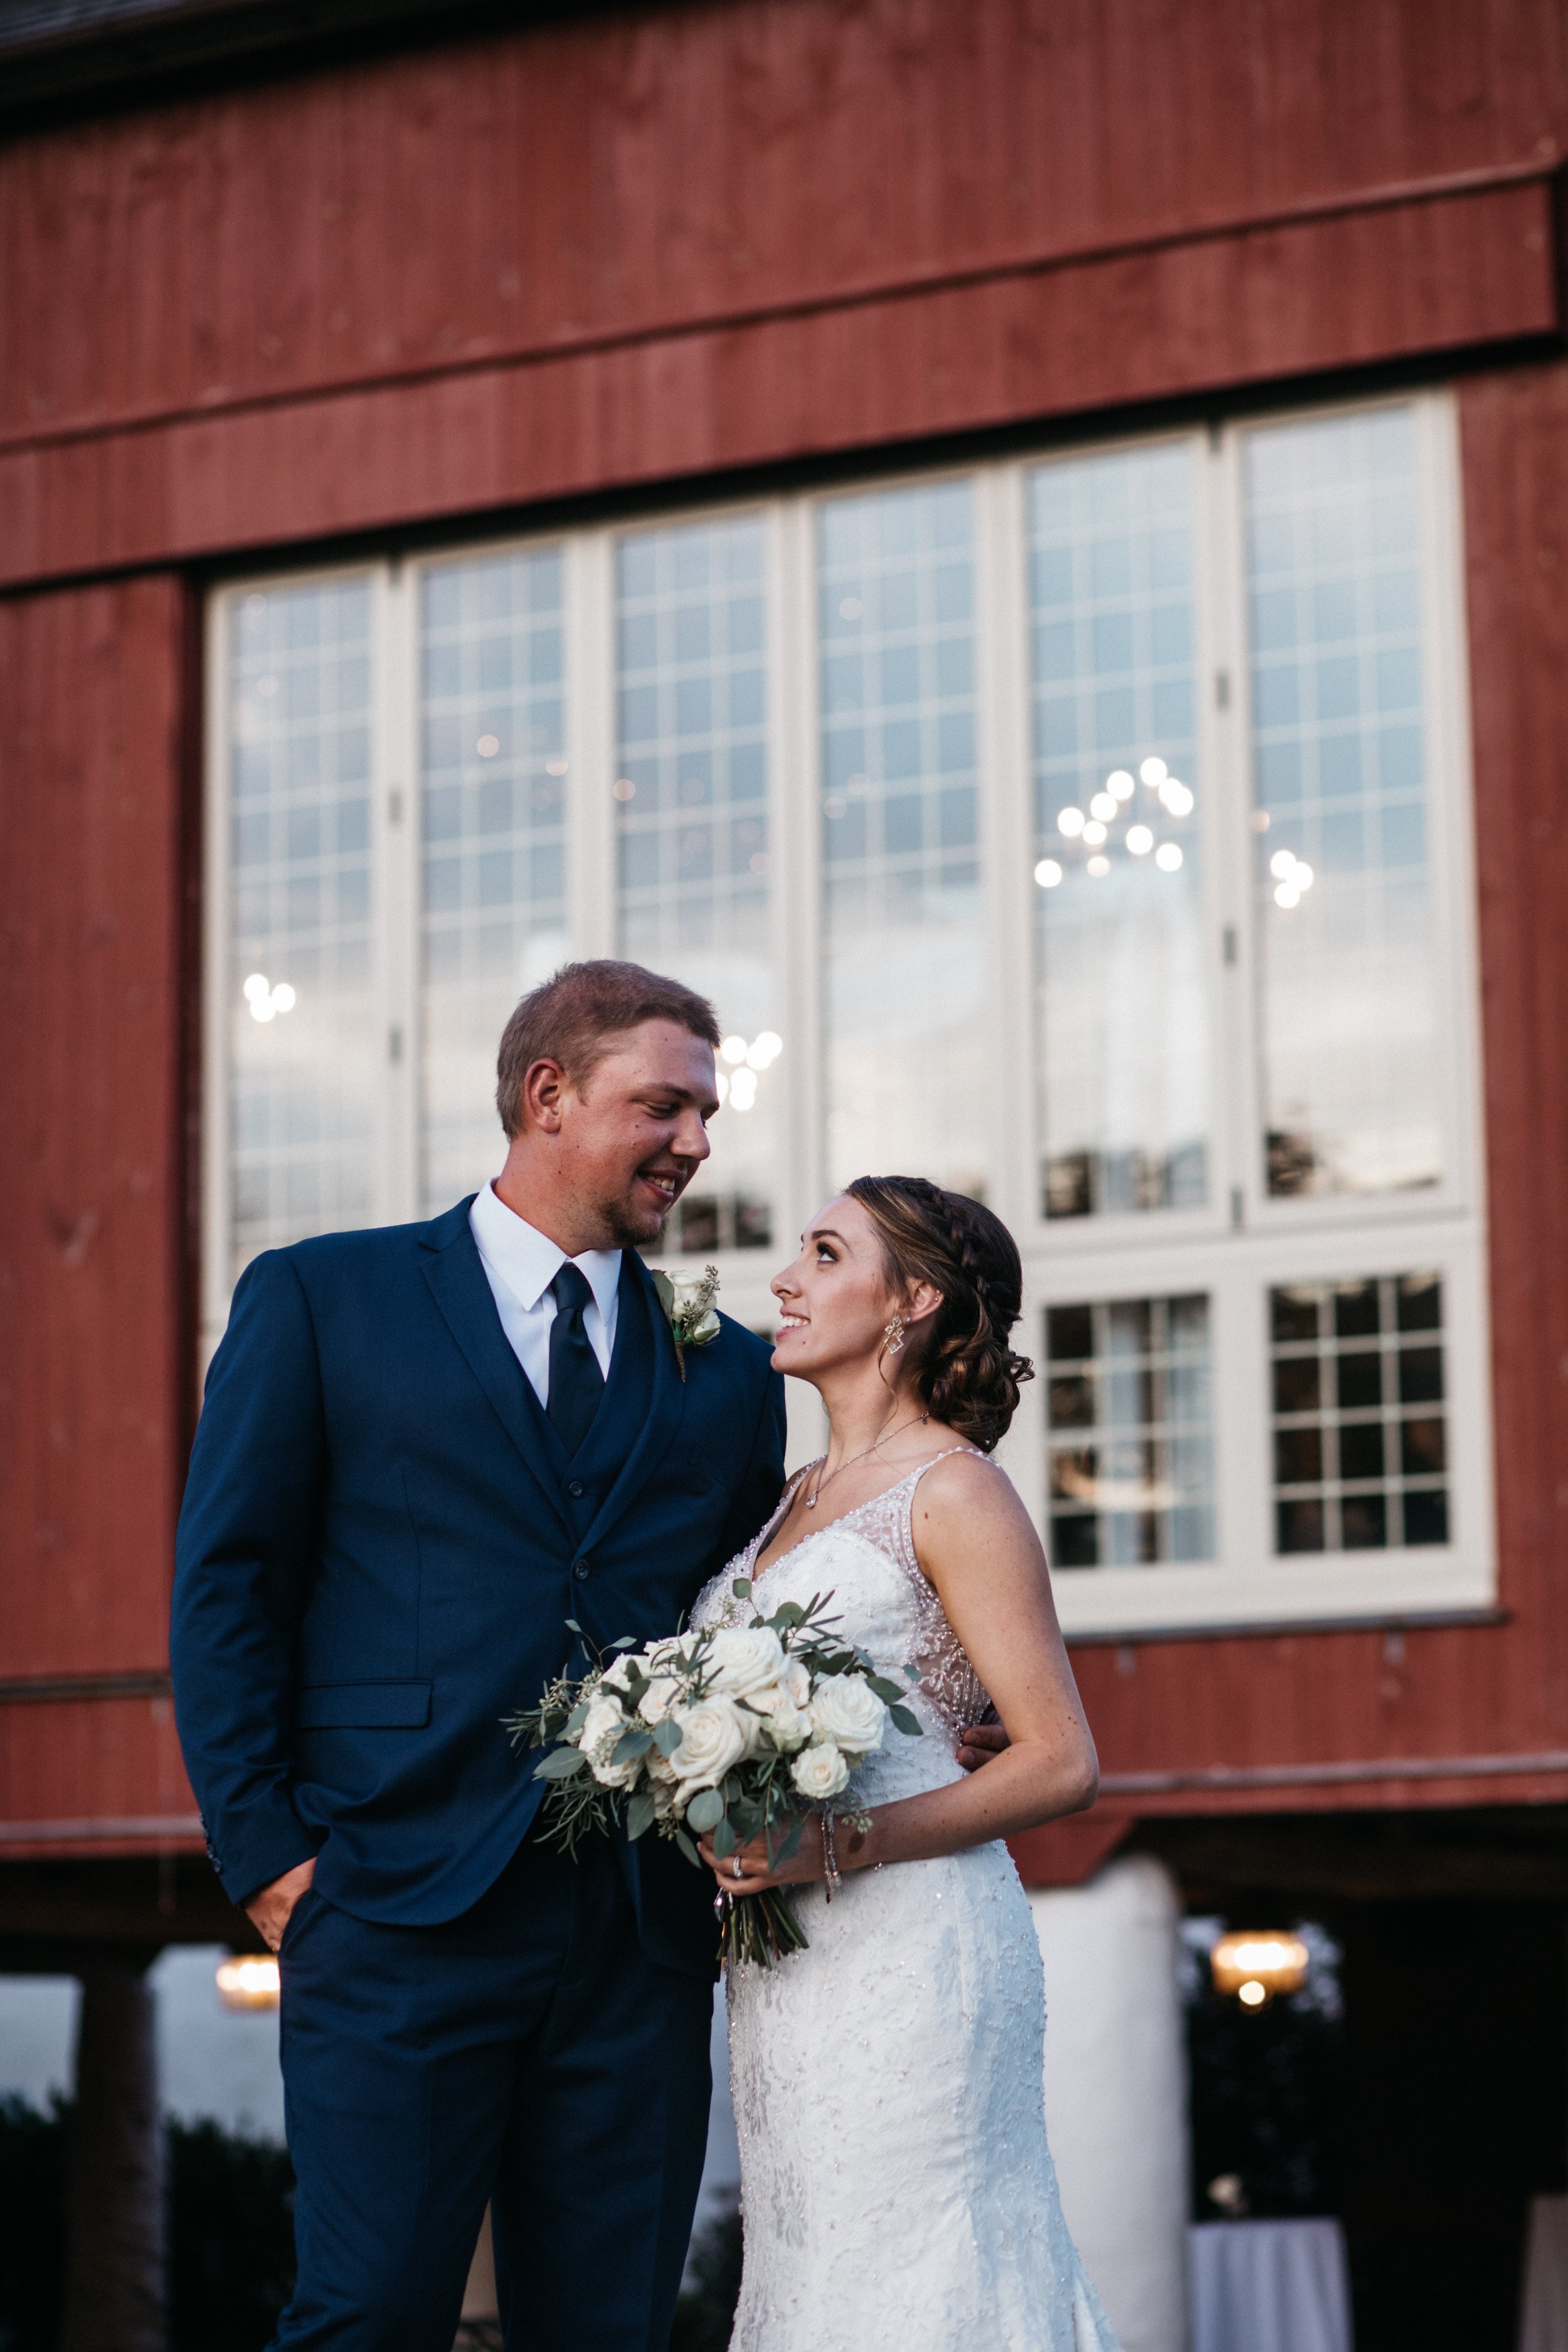 Portrait outside A outdoor wedding ceremony and brandywine manor house.